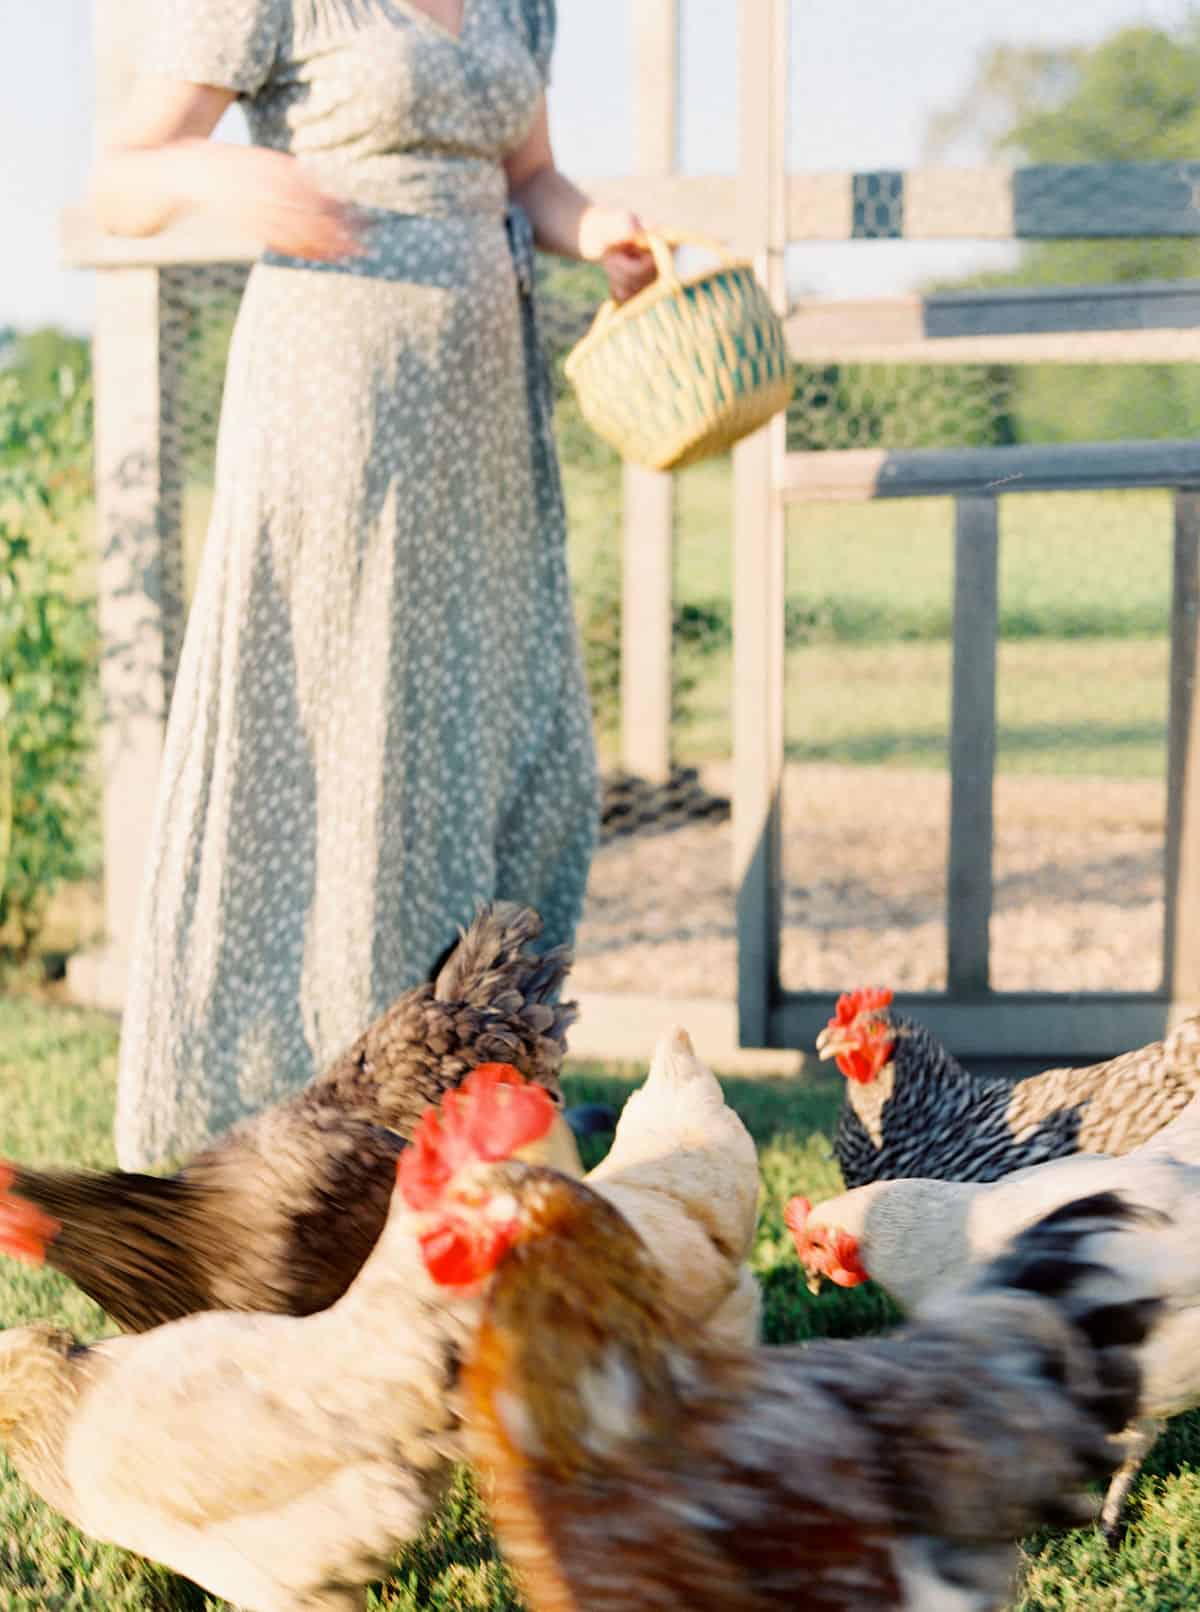 Do you have a homestead or a hobby? Learn more at everlyraine.com by Katie O. Selvidge